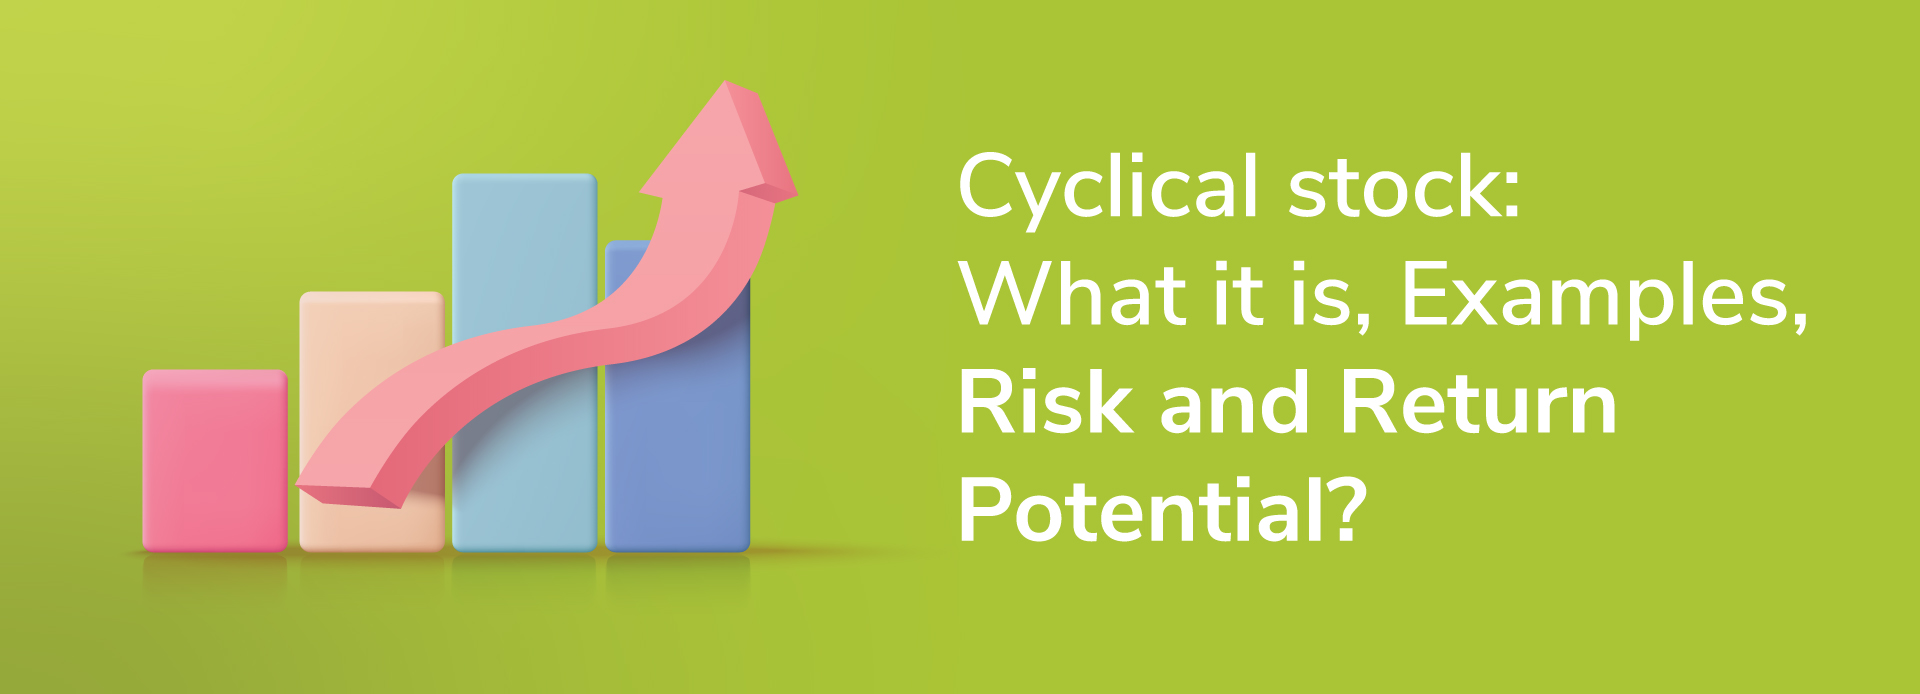 Cyclical stock: What it is, Examples, Risk and Return Potential